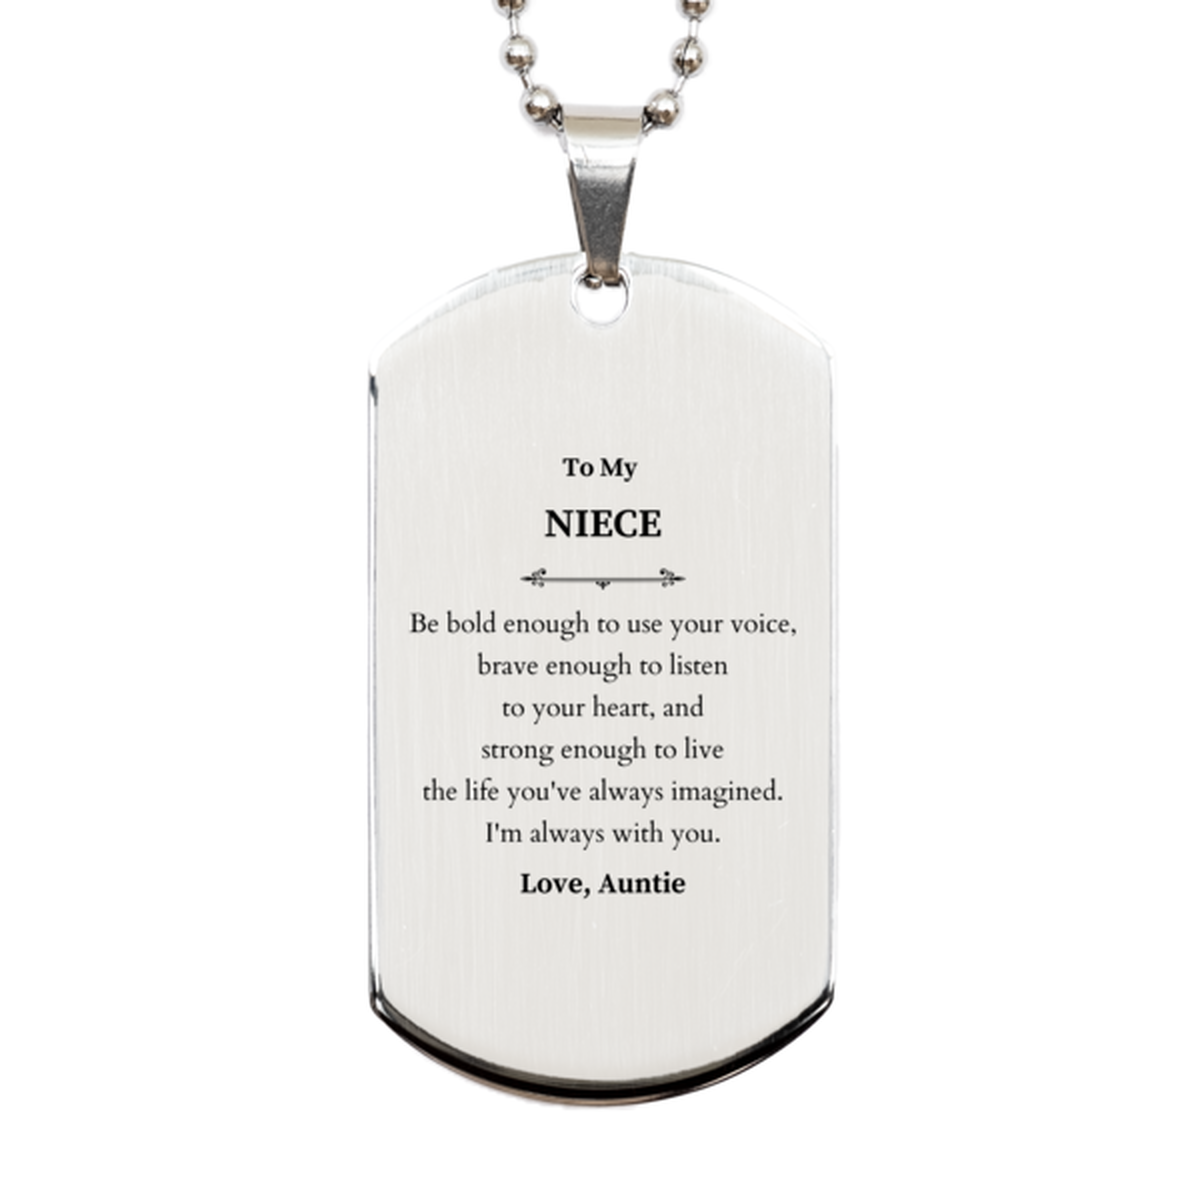 Keepsake Niece Silver Dog Tag Gift Idea Graduation Christmas Birthday Niece from Auntie, Niece Be bold enough to use your voice, brave enough to listen to your heart. Love, Auntie